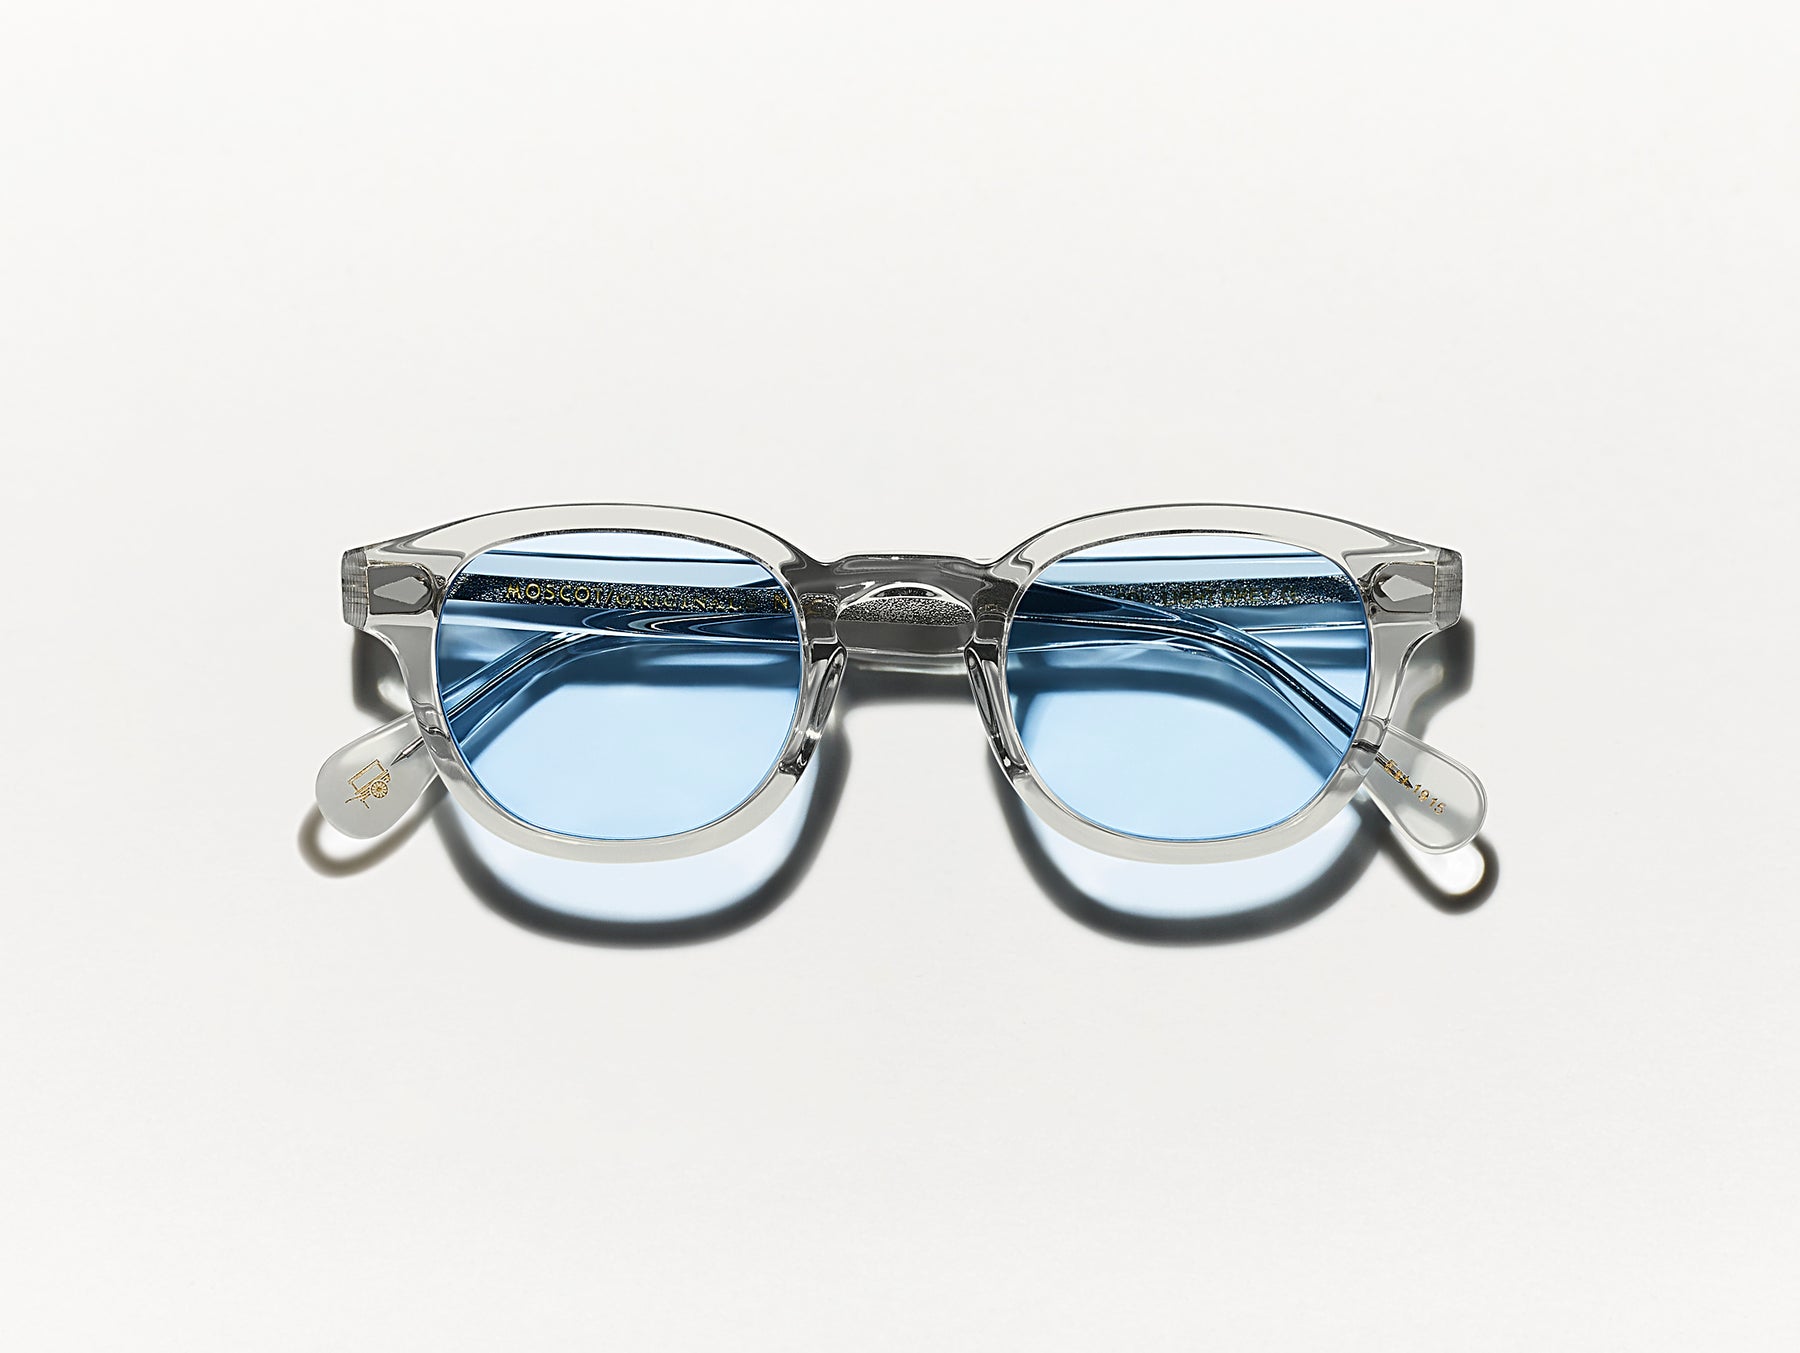 The LEMTOSH Light Grey with Bel Air Blue Tinted Lenses